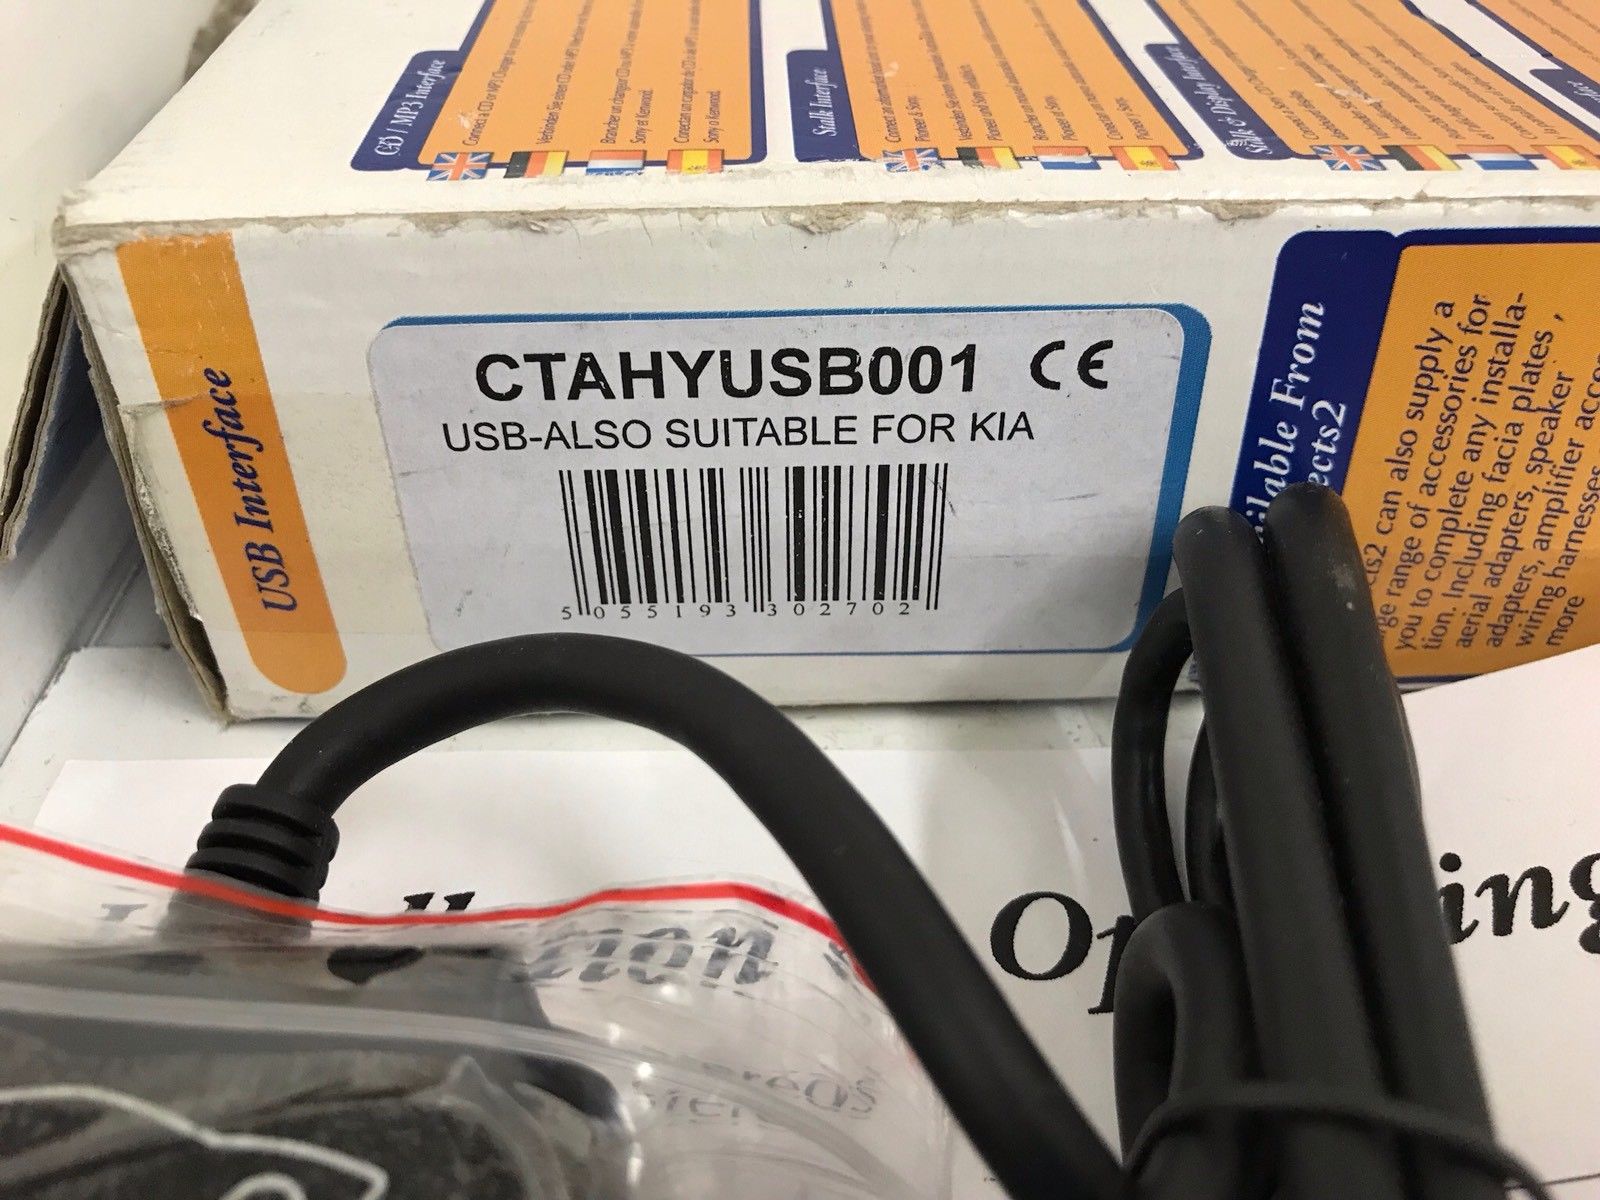 Connects 2 Ctahyusb001 USB Aux In Adaptor Kit Interface Kit